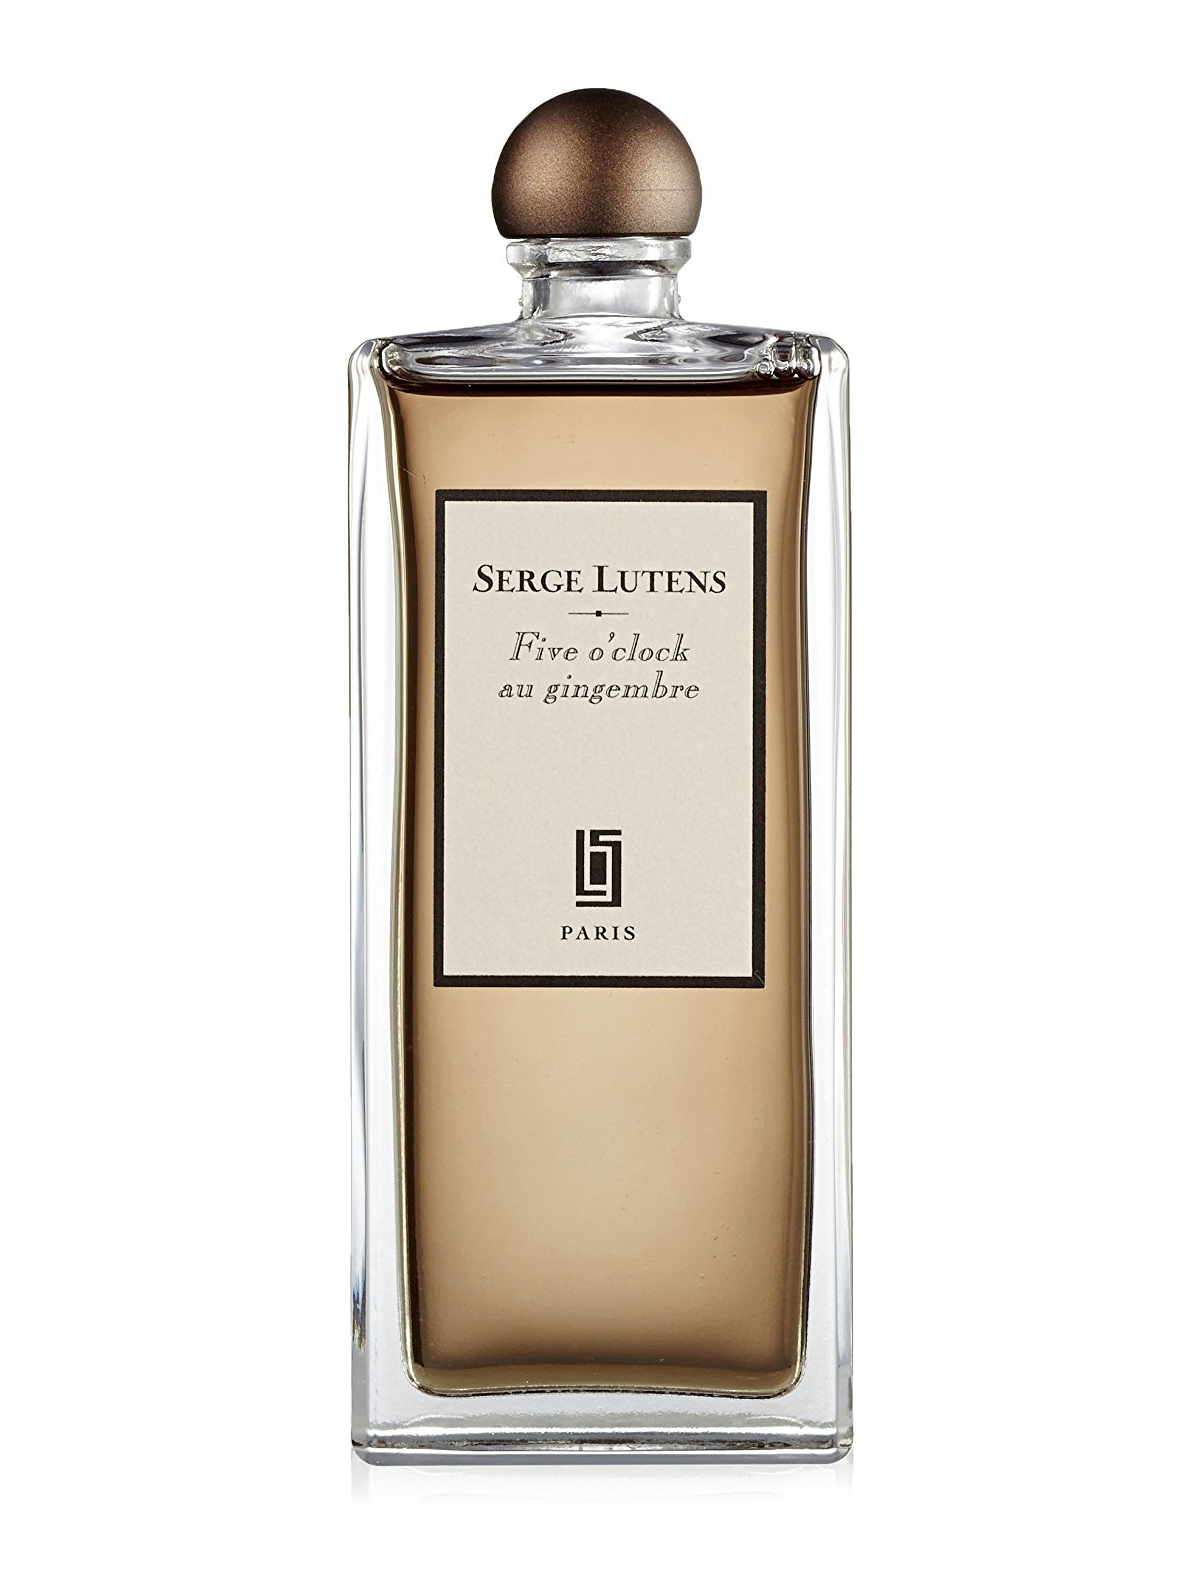 Five O`Clock Au Gingembre Serge Lutens for women and men